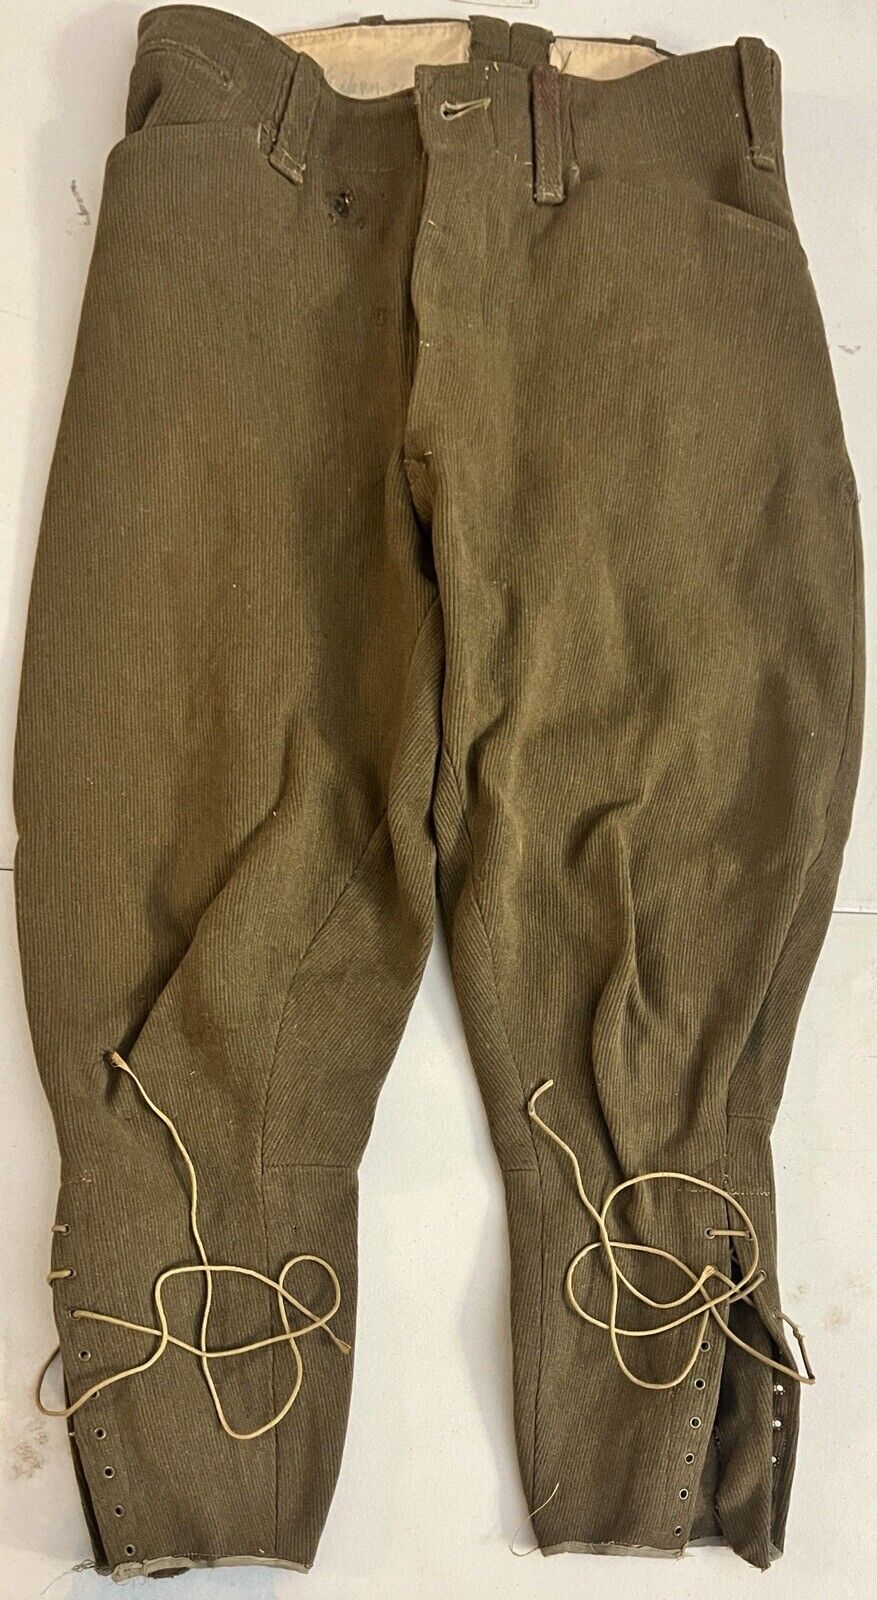 Army Military Corduroy Artillery Breeches Trousers Customized Circa 1900s